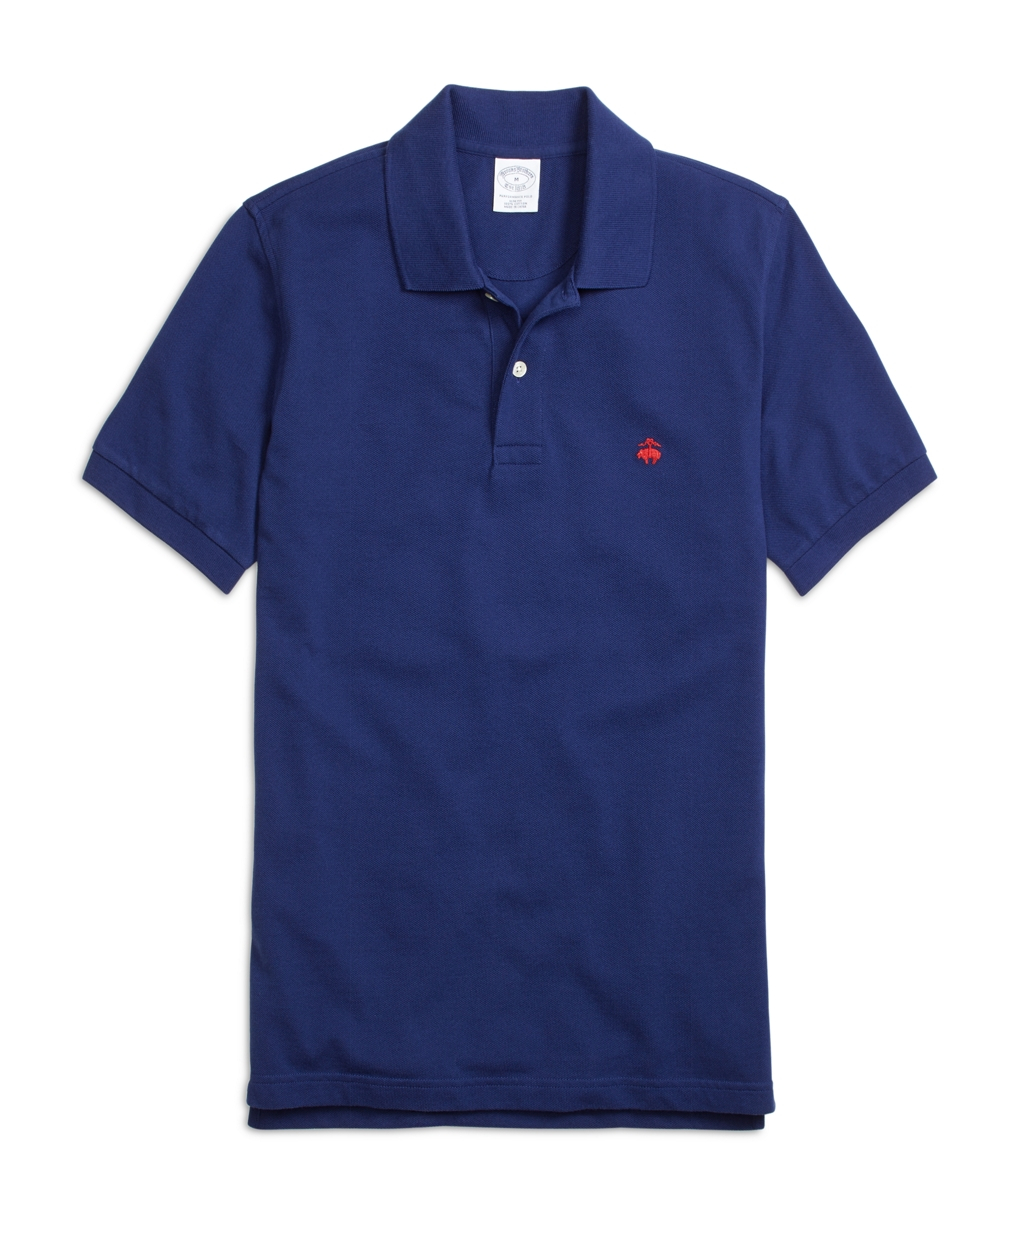 Brooks brothers Golden Fleece® Slim Fit Performance Polo Shirt in Blue ...